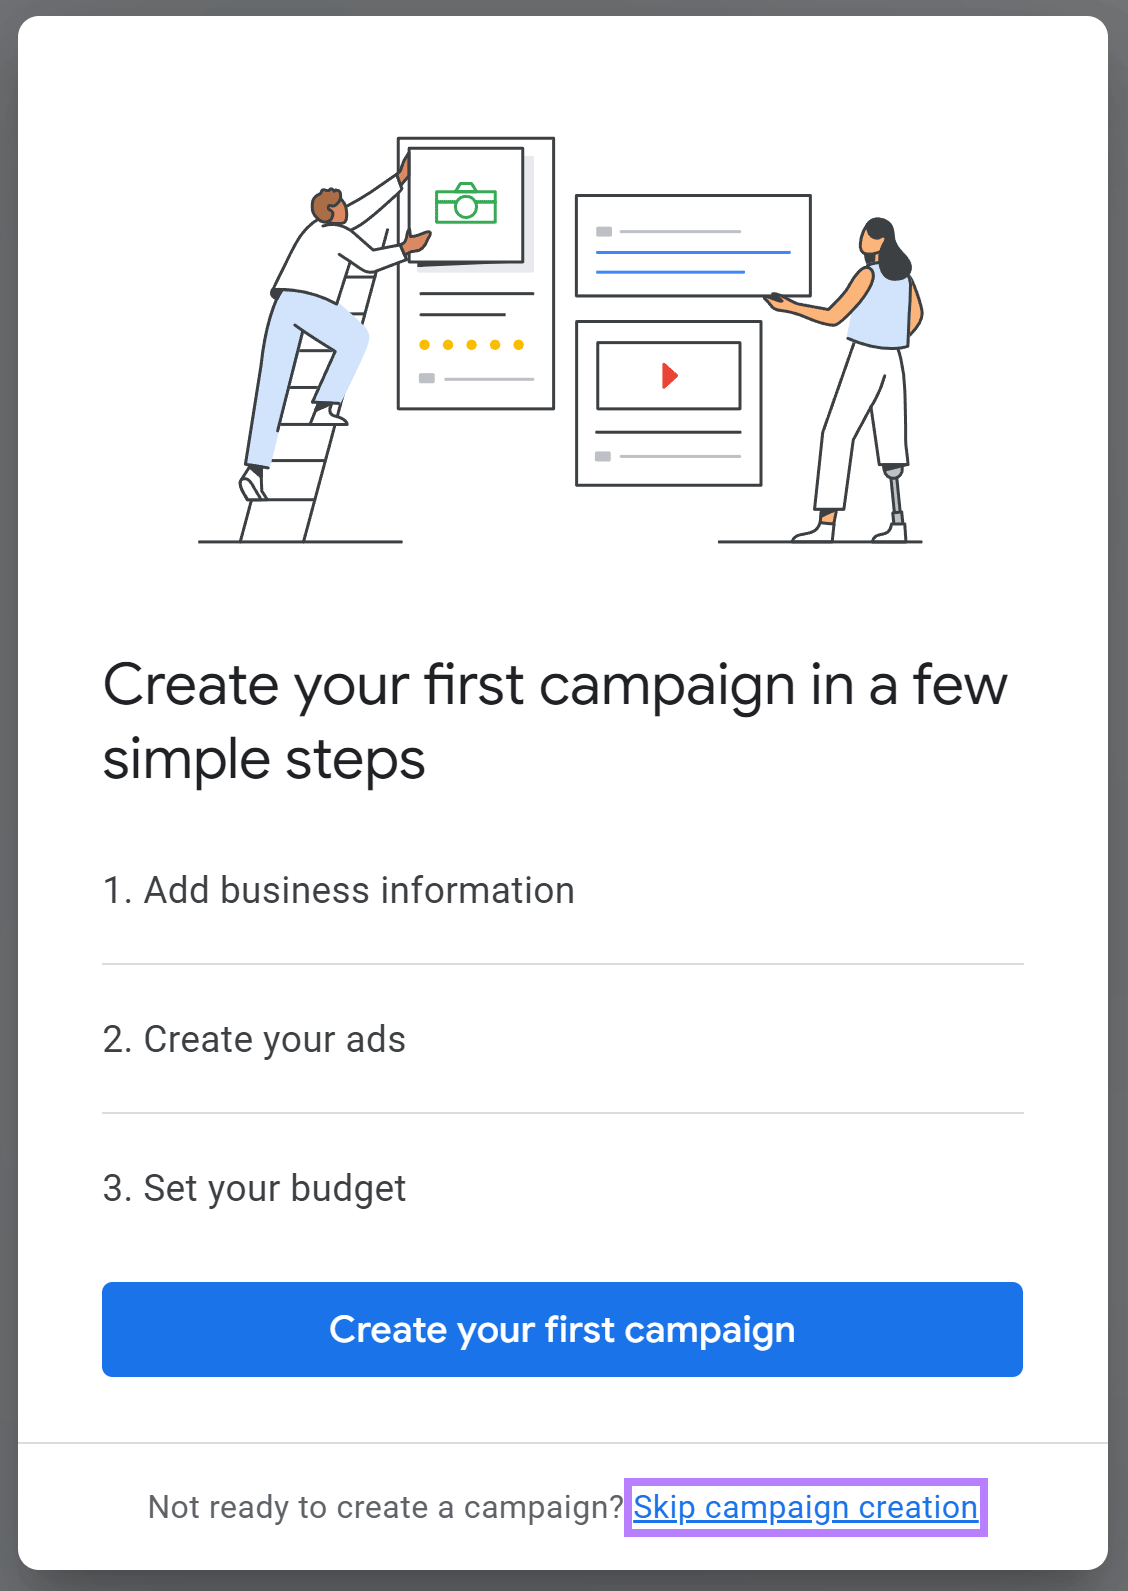 Campaign creation popup with Skip campaign creation link highlighted.